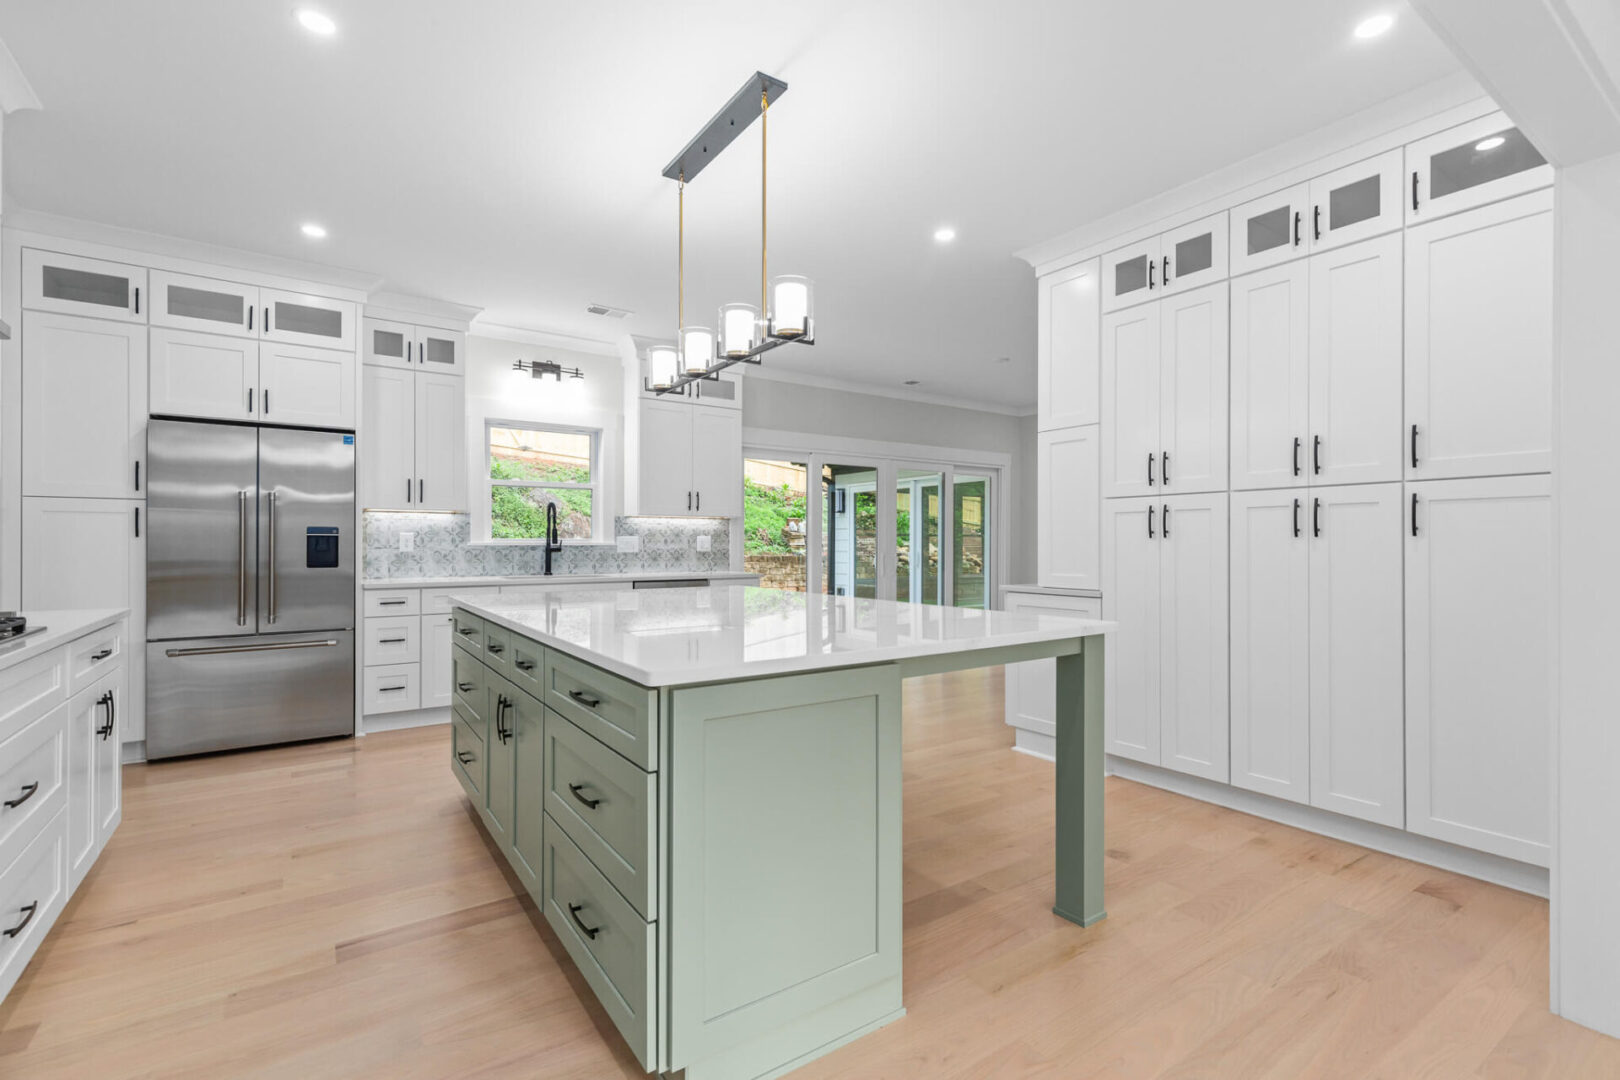 A large kitchen with white cabinets and island